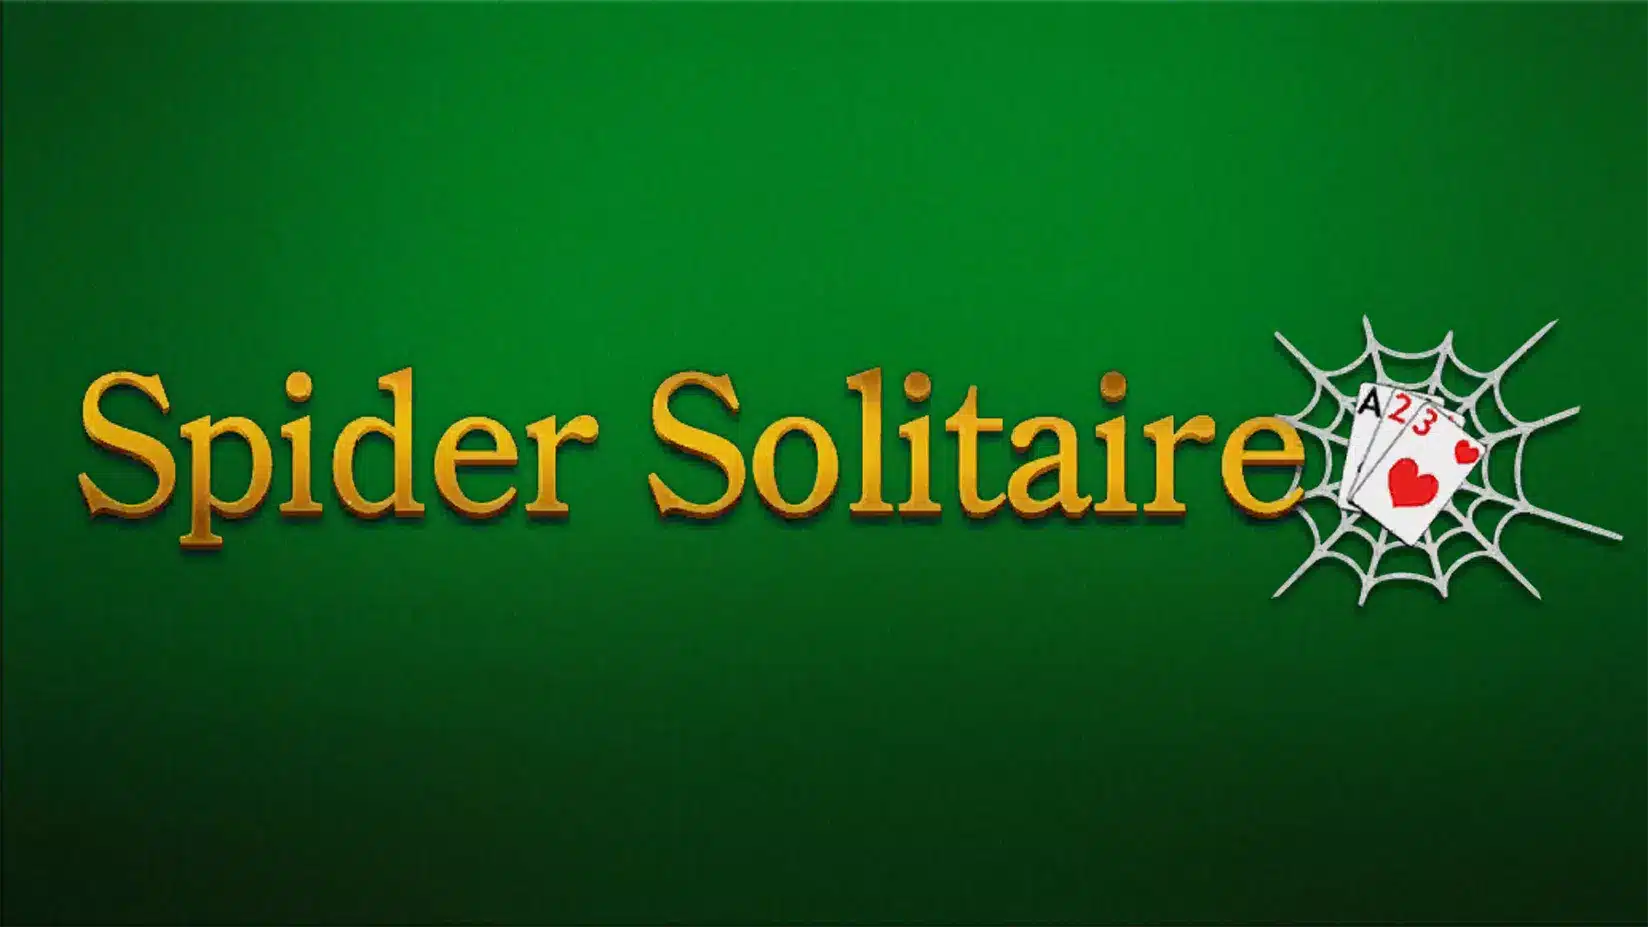 Spider Solitaire Image 8